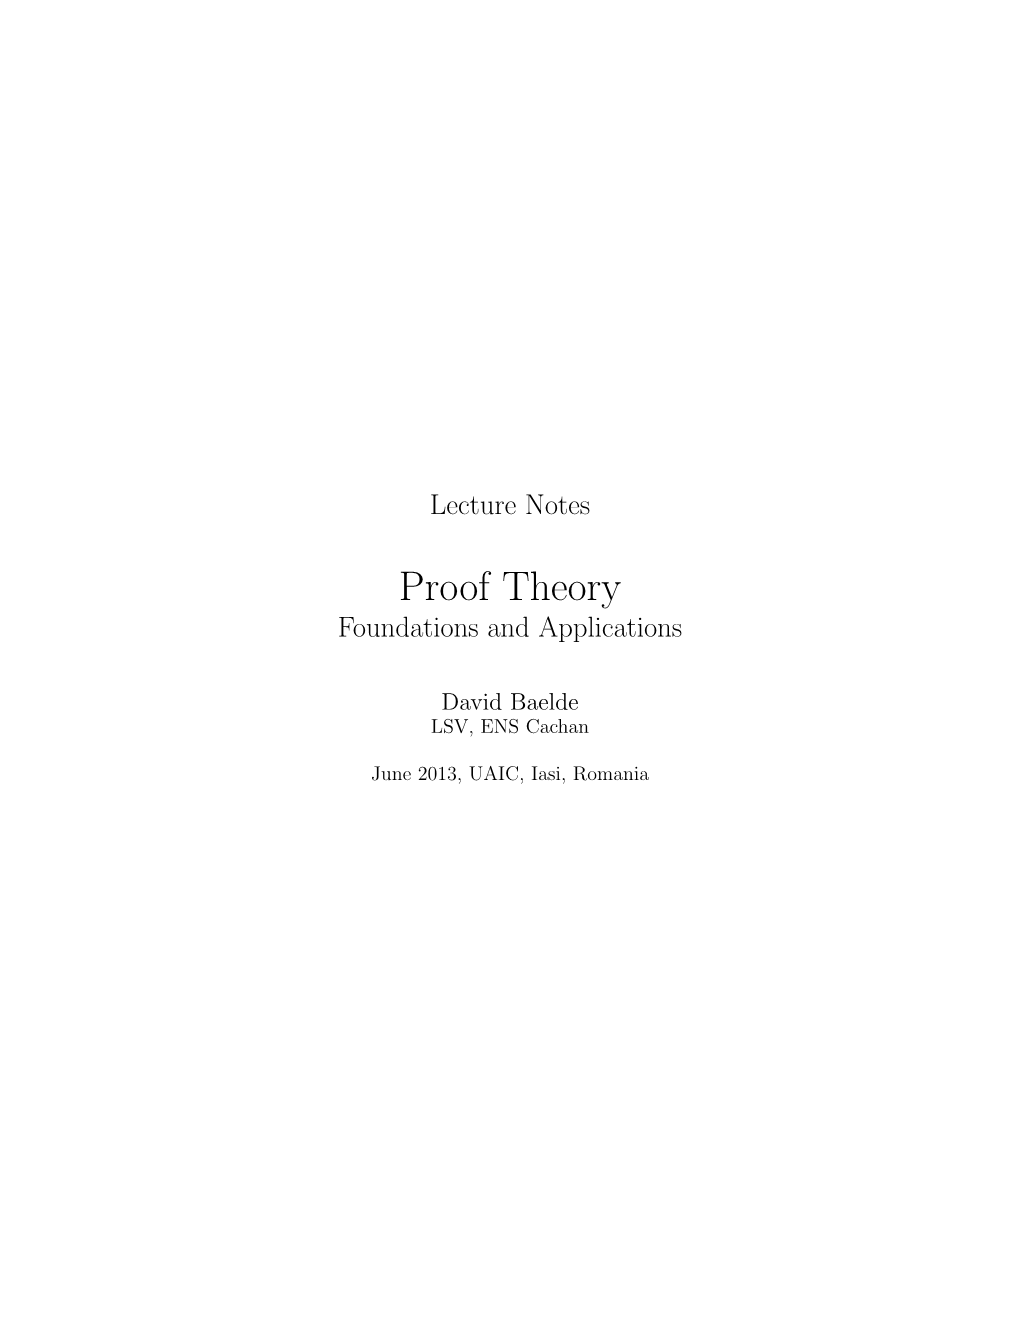 Proof Theory Foundations and Applications